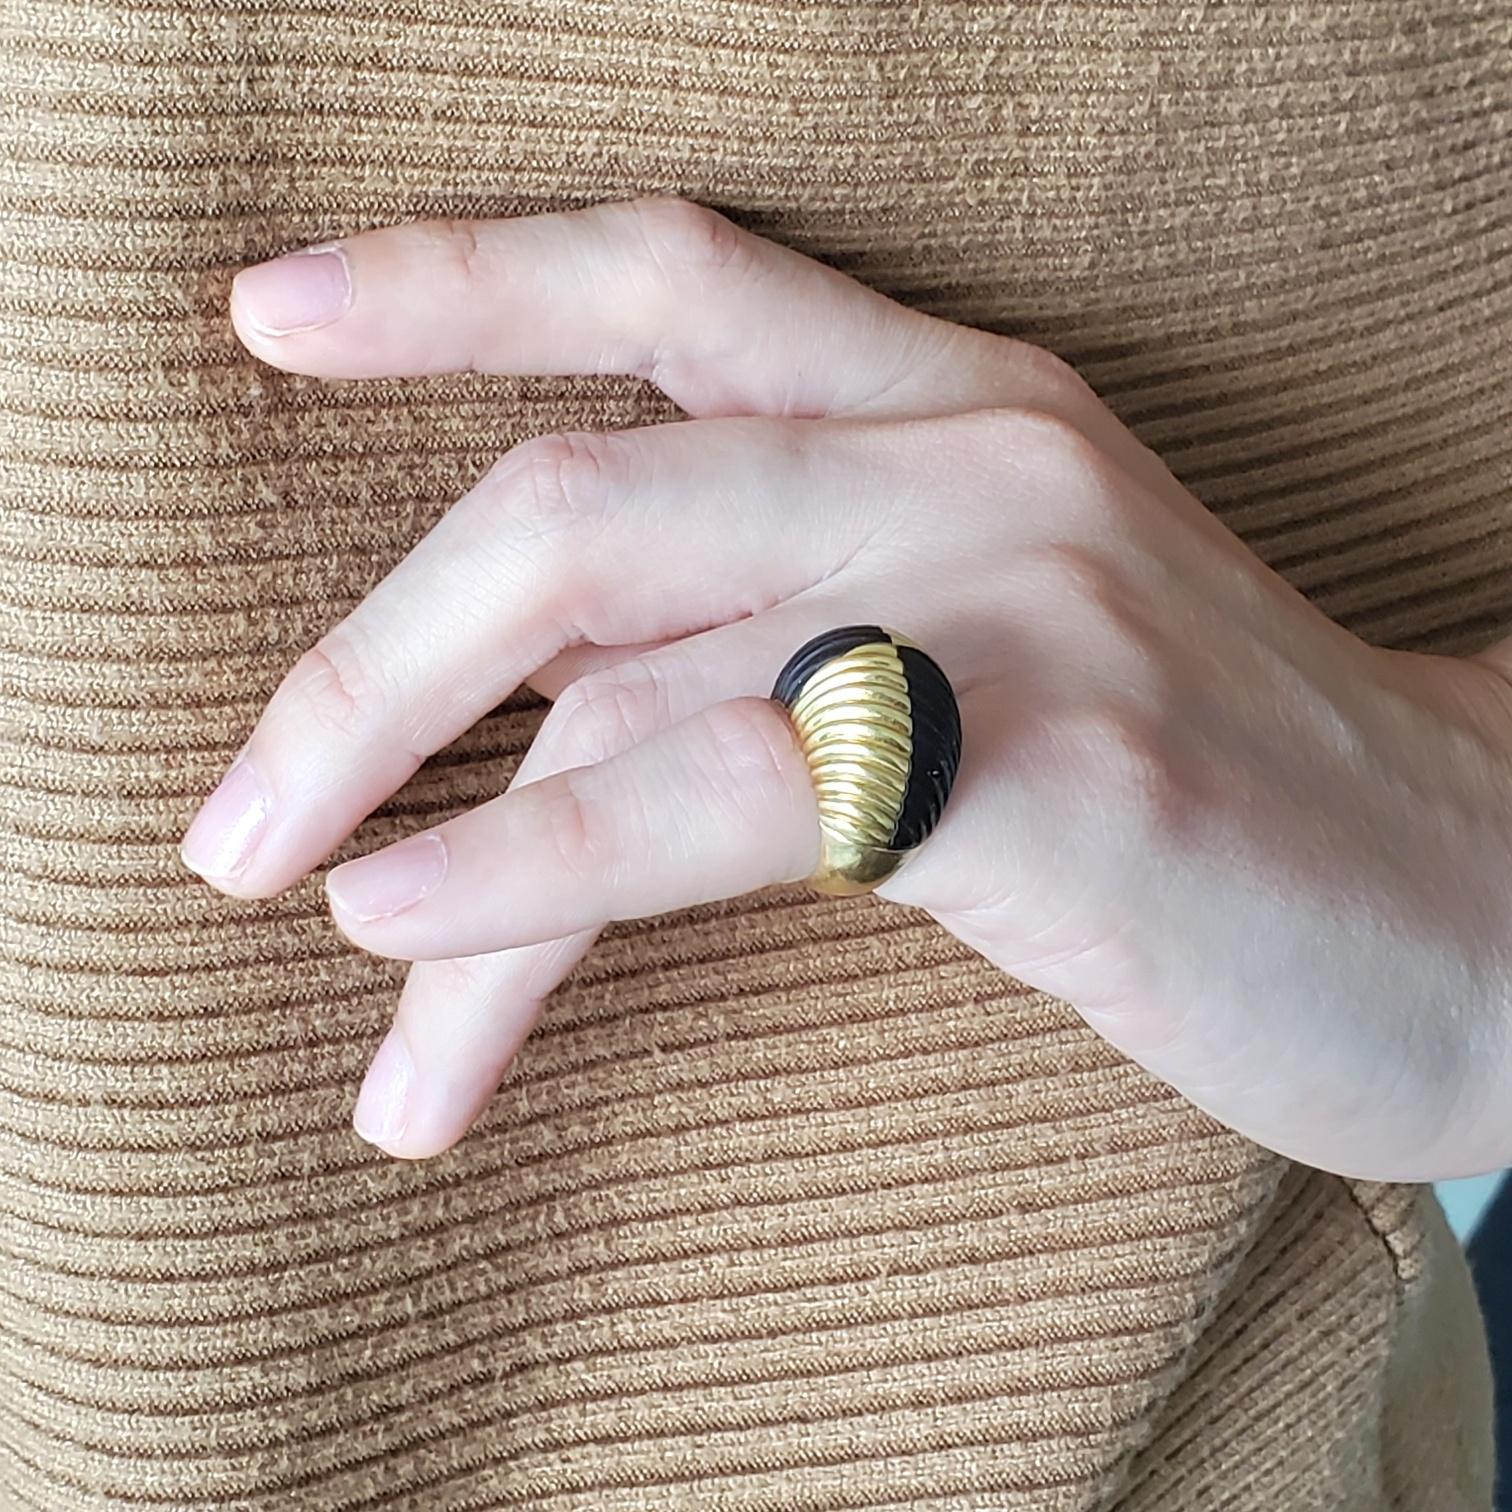 Bombe cocktail ring designed by Van Cleef & Arpels.

A vintage modernist ring, created in Paris France by the jewelry house of Van Cleef & Arpels, back in the 1970. This rare ring was carefully assembled and crafted in solid yellow gold of 18 karats